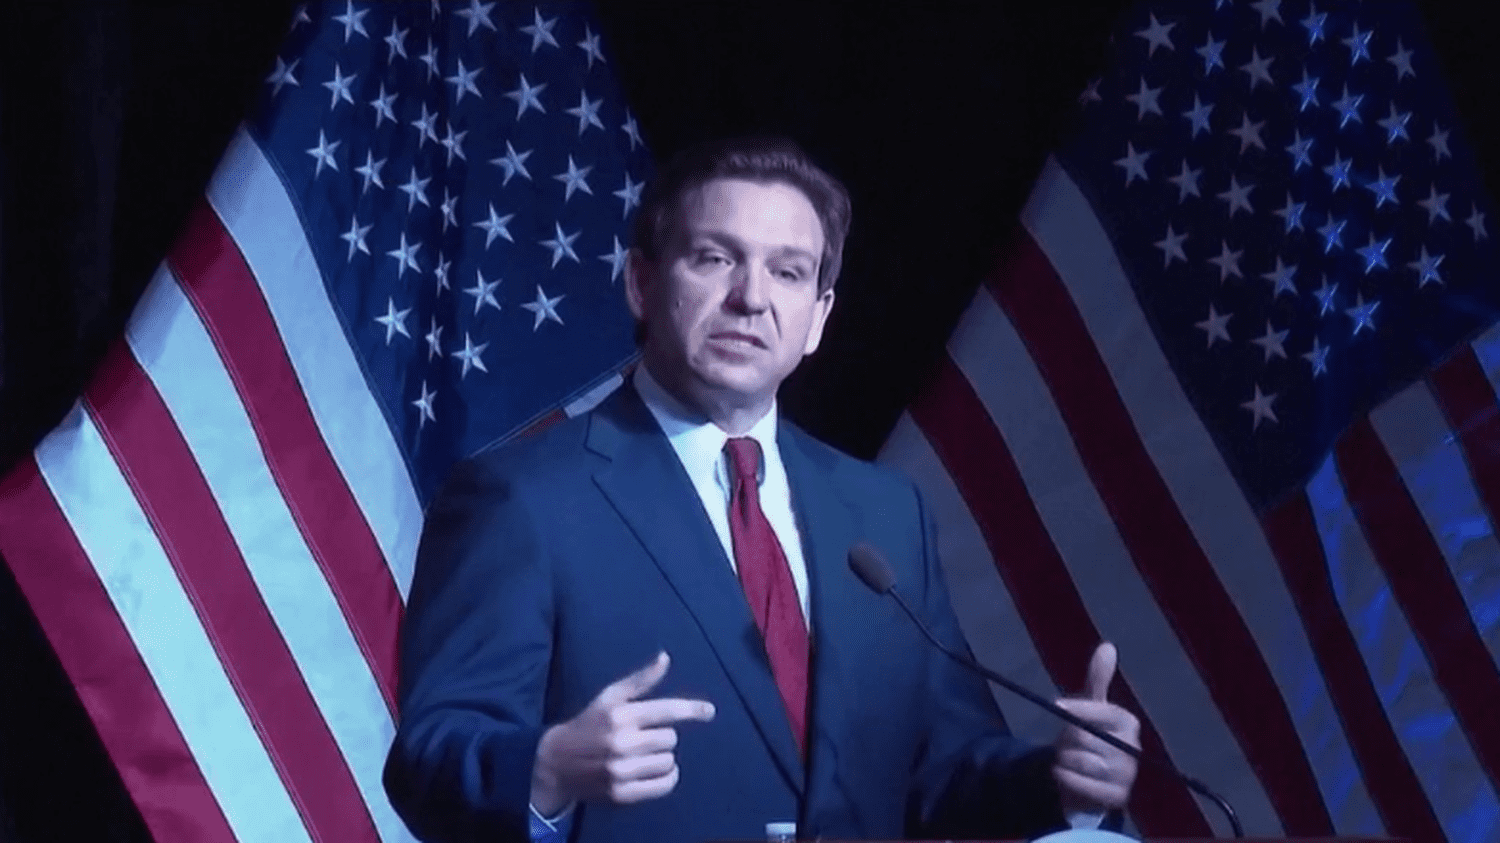 United States: Ron DeSantis, rival of Donald Trump, makes a chaotic entry into the campaign
